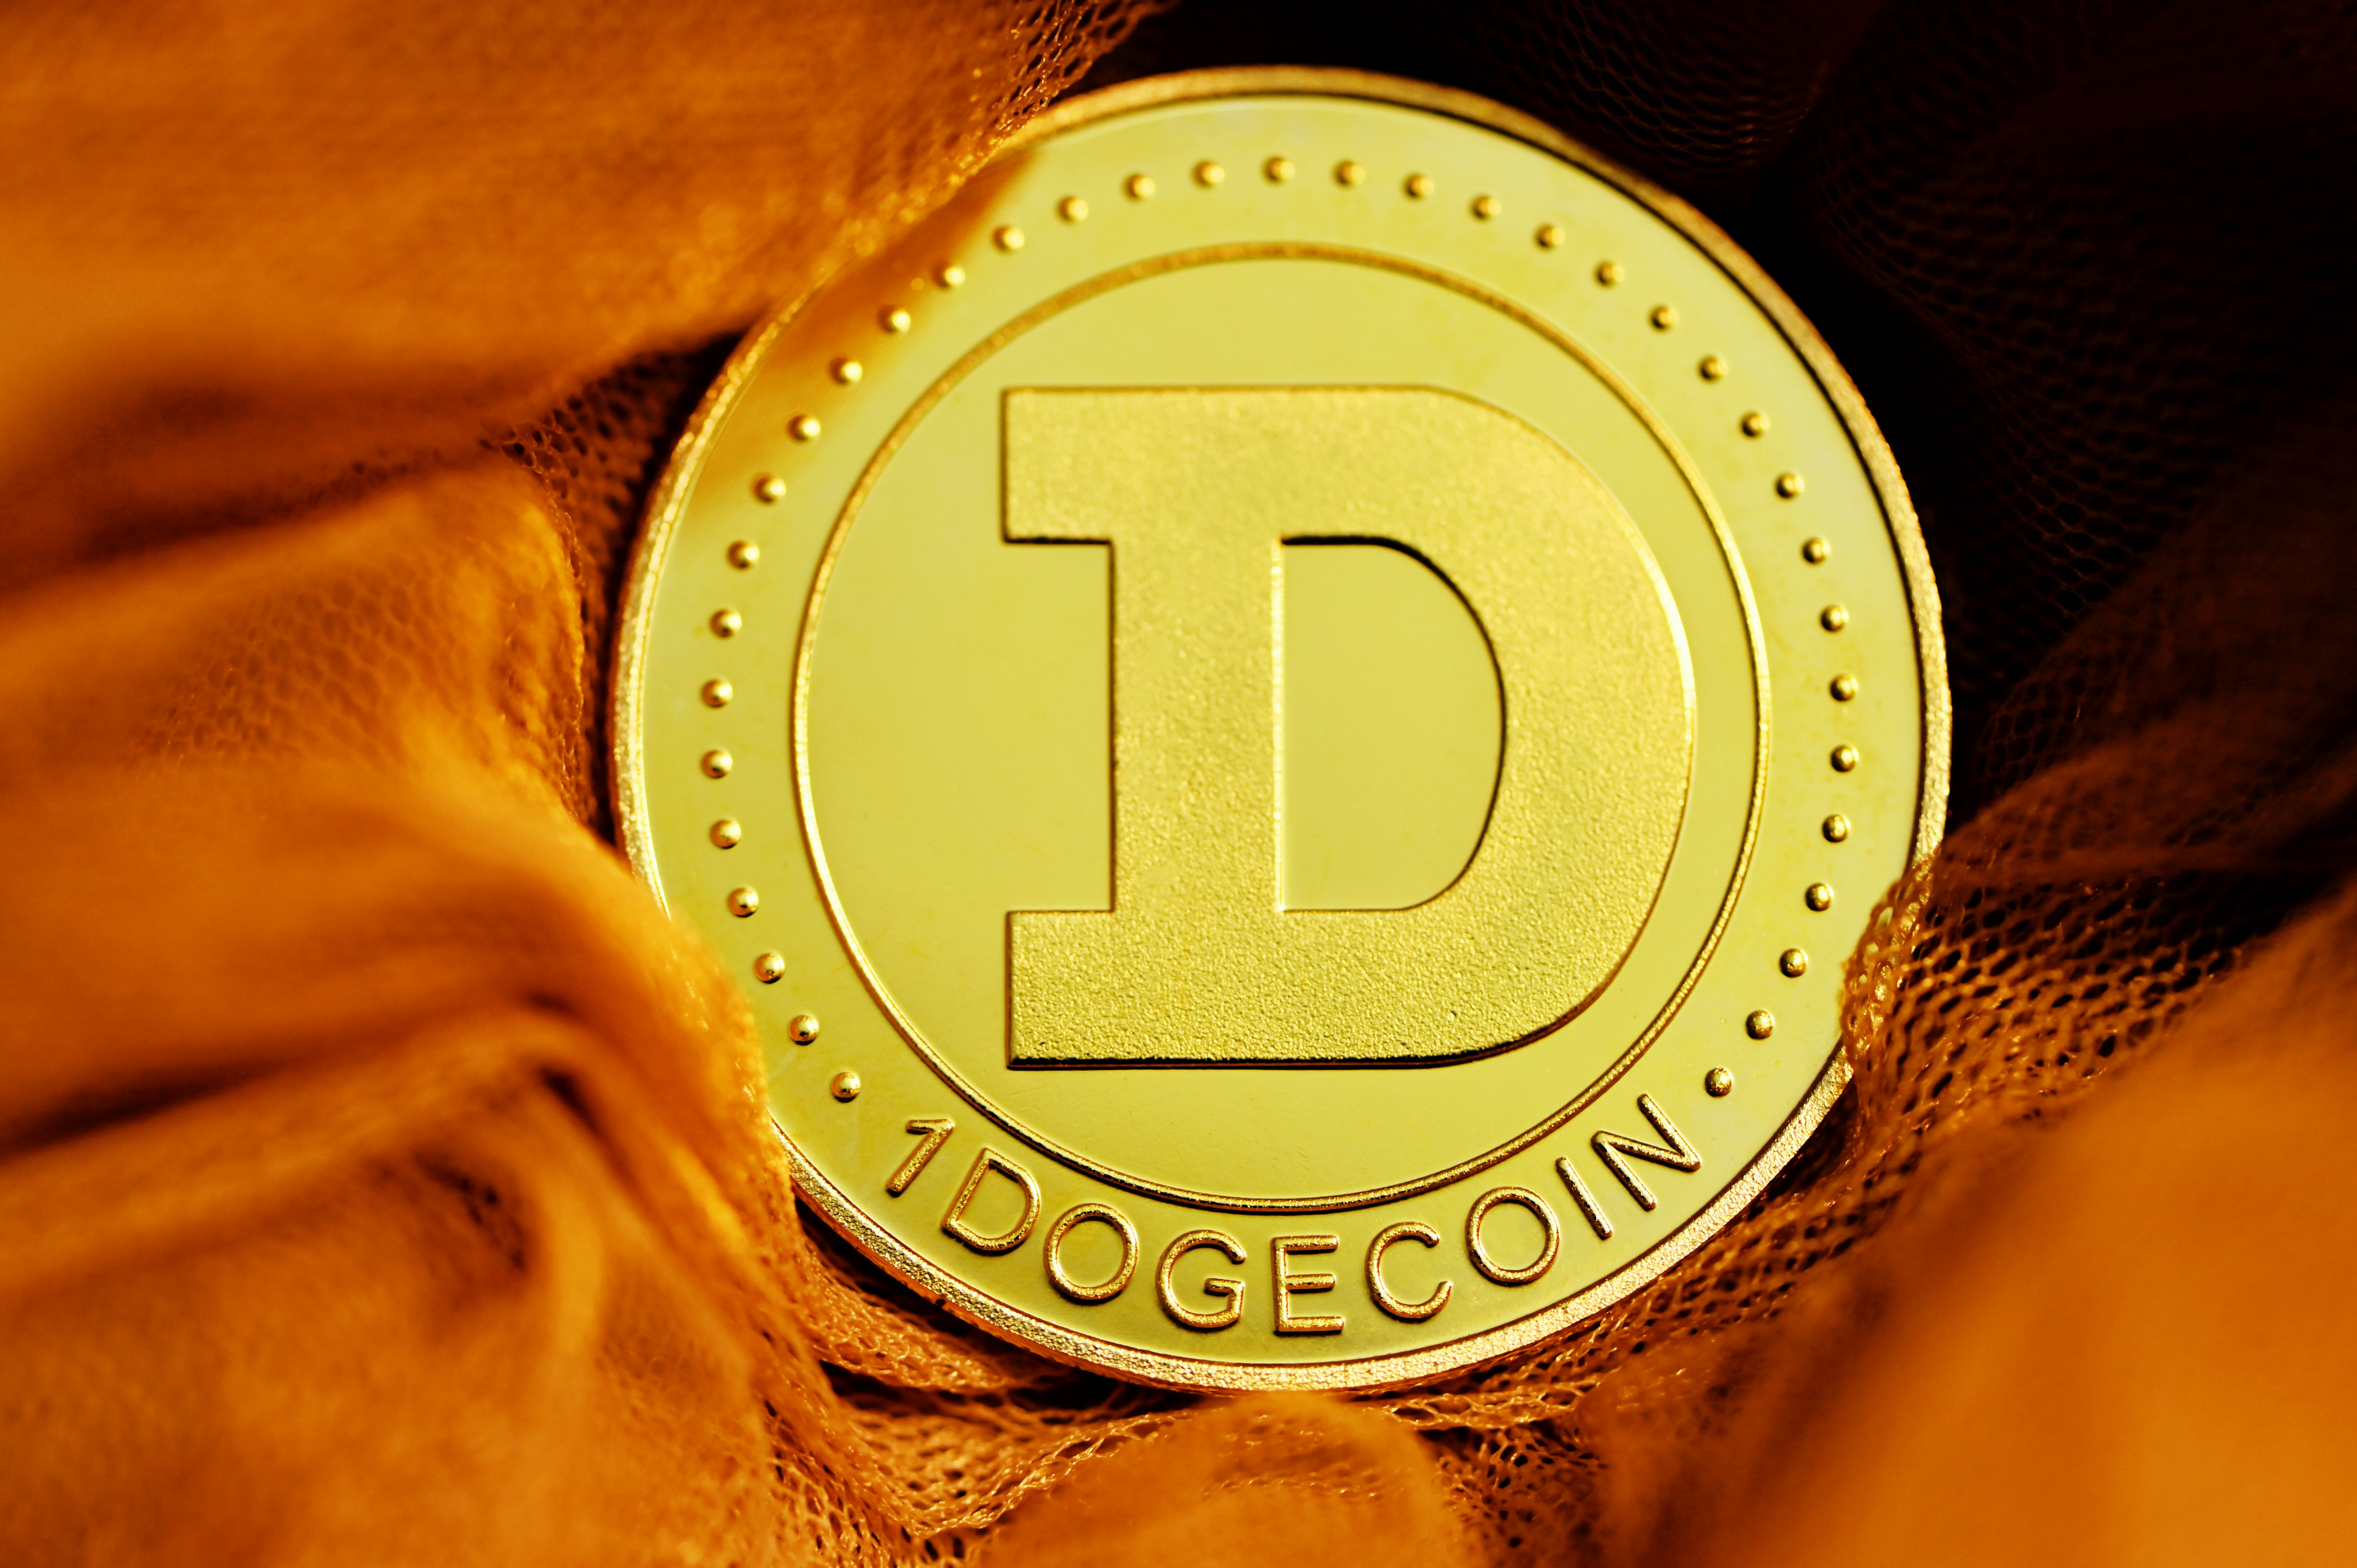 A single Dogecoin covered by orange fabric.